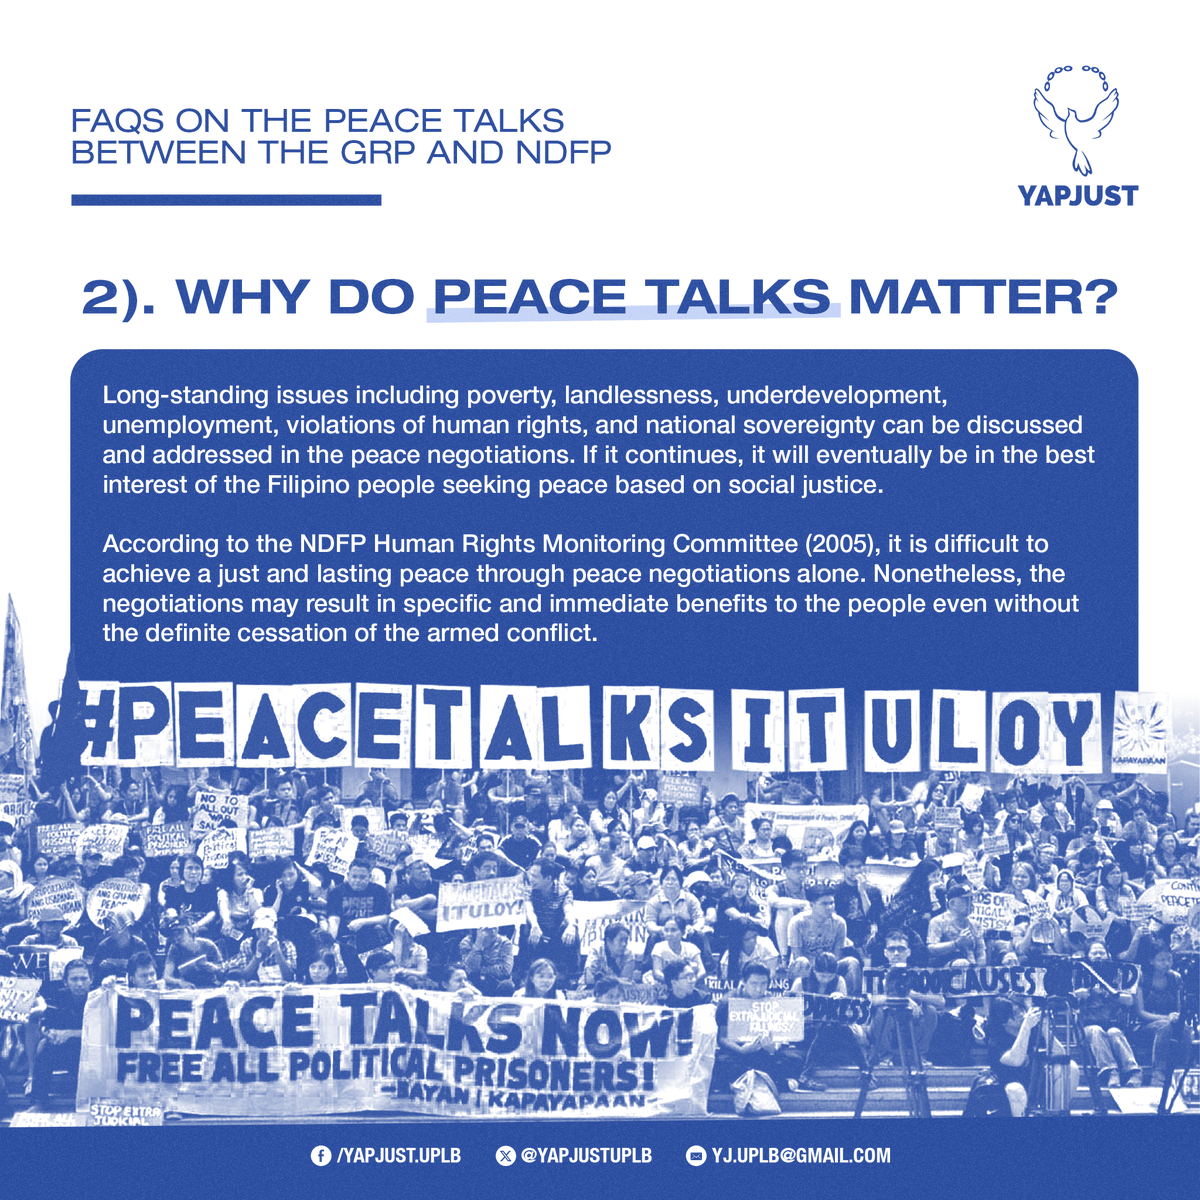 Did you know that Asia’s longest communist armed revolution is still being waged in the Philippines? Today, the CPP—the party that leads it—turns 55.

#PeaceTalksItuloy🕊️
#UpholdCARHRIHL
#DefendHumanRights